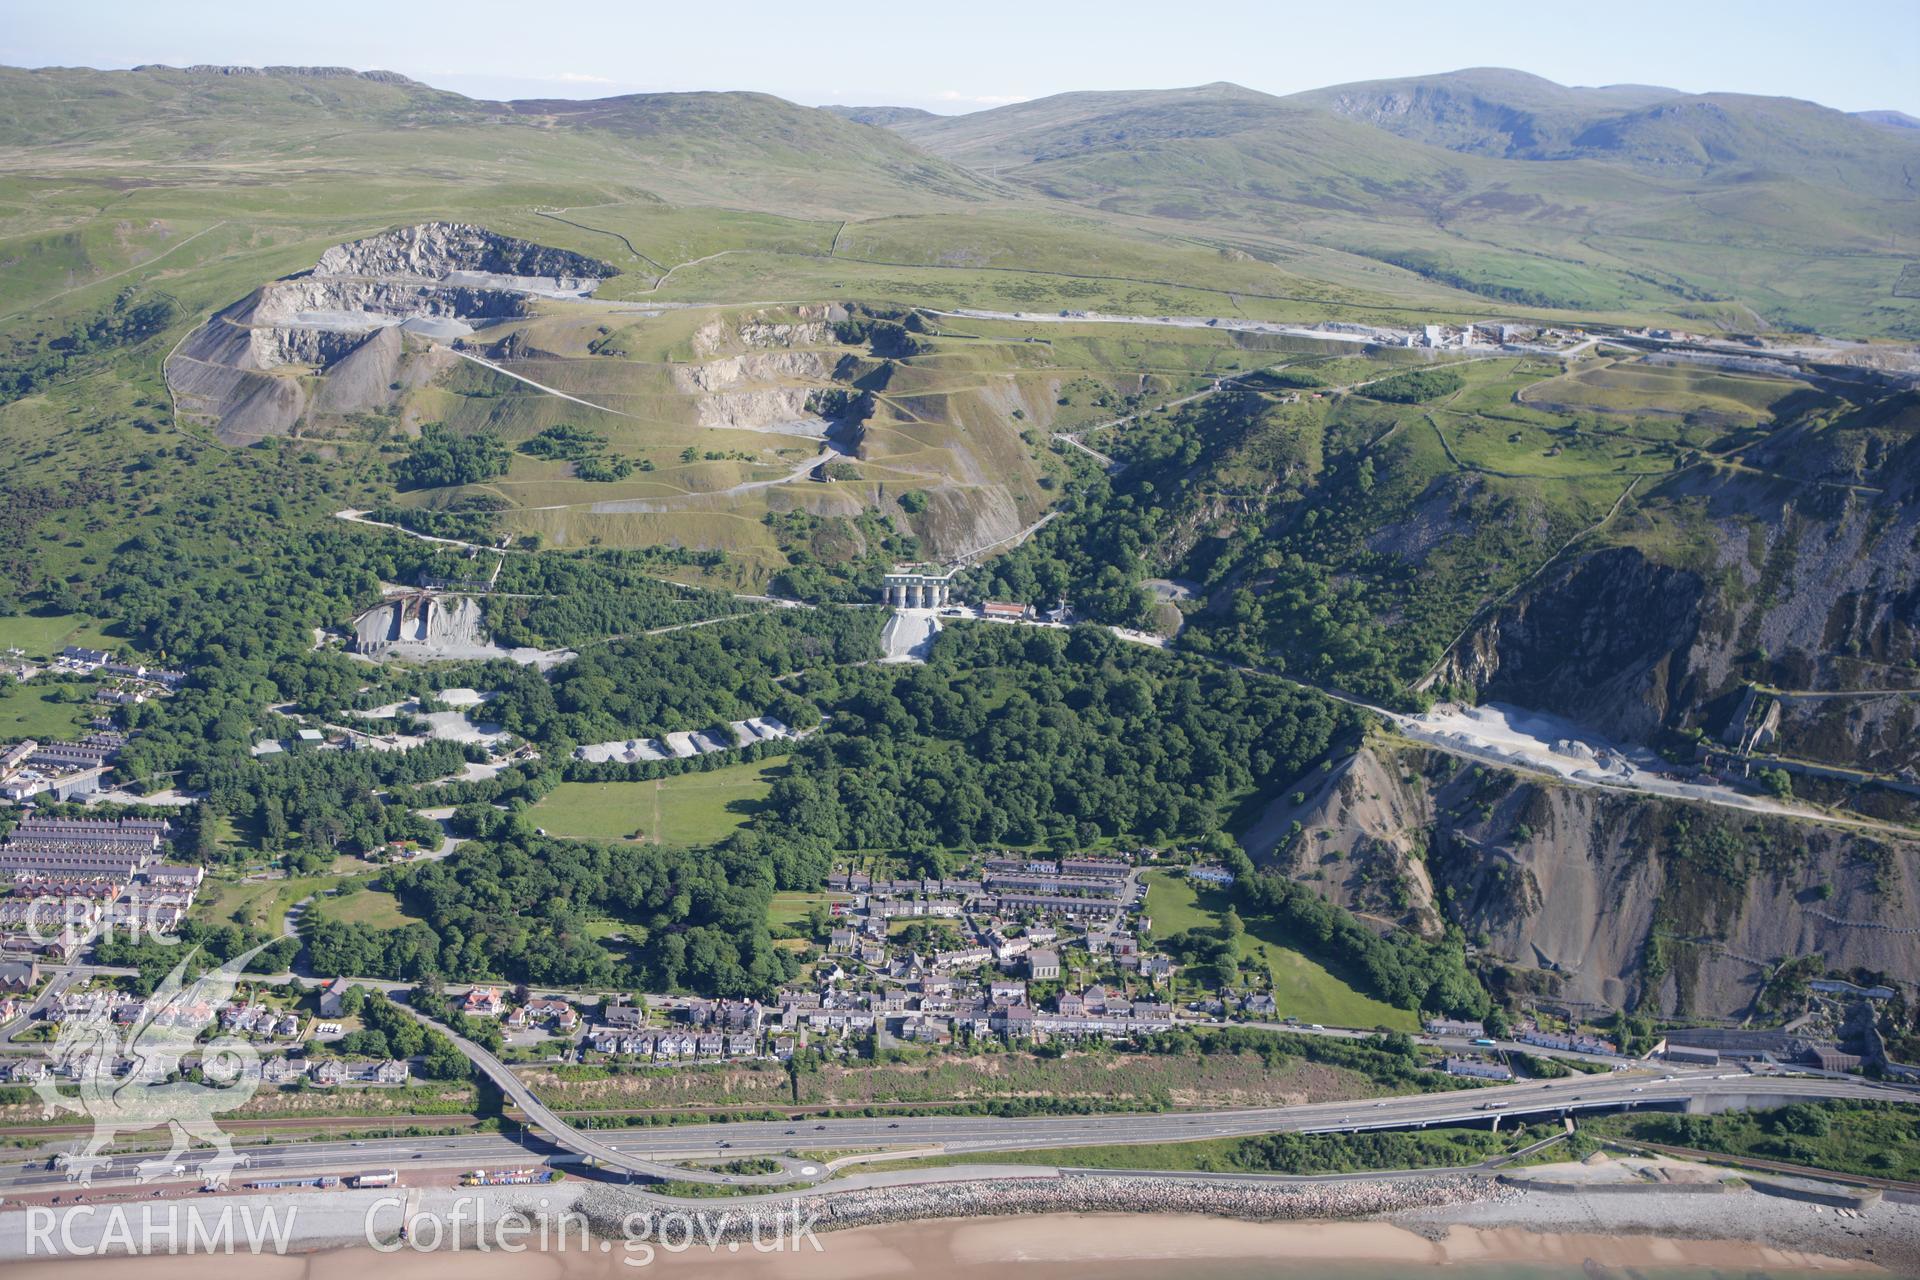 RCAHMW colour oblique photograph of Penmaenmawr Stone Quarry, with Penmaenmawr town below. Taken by Toby Driver on 16/06/2010.